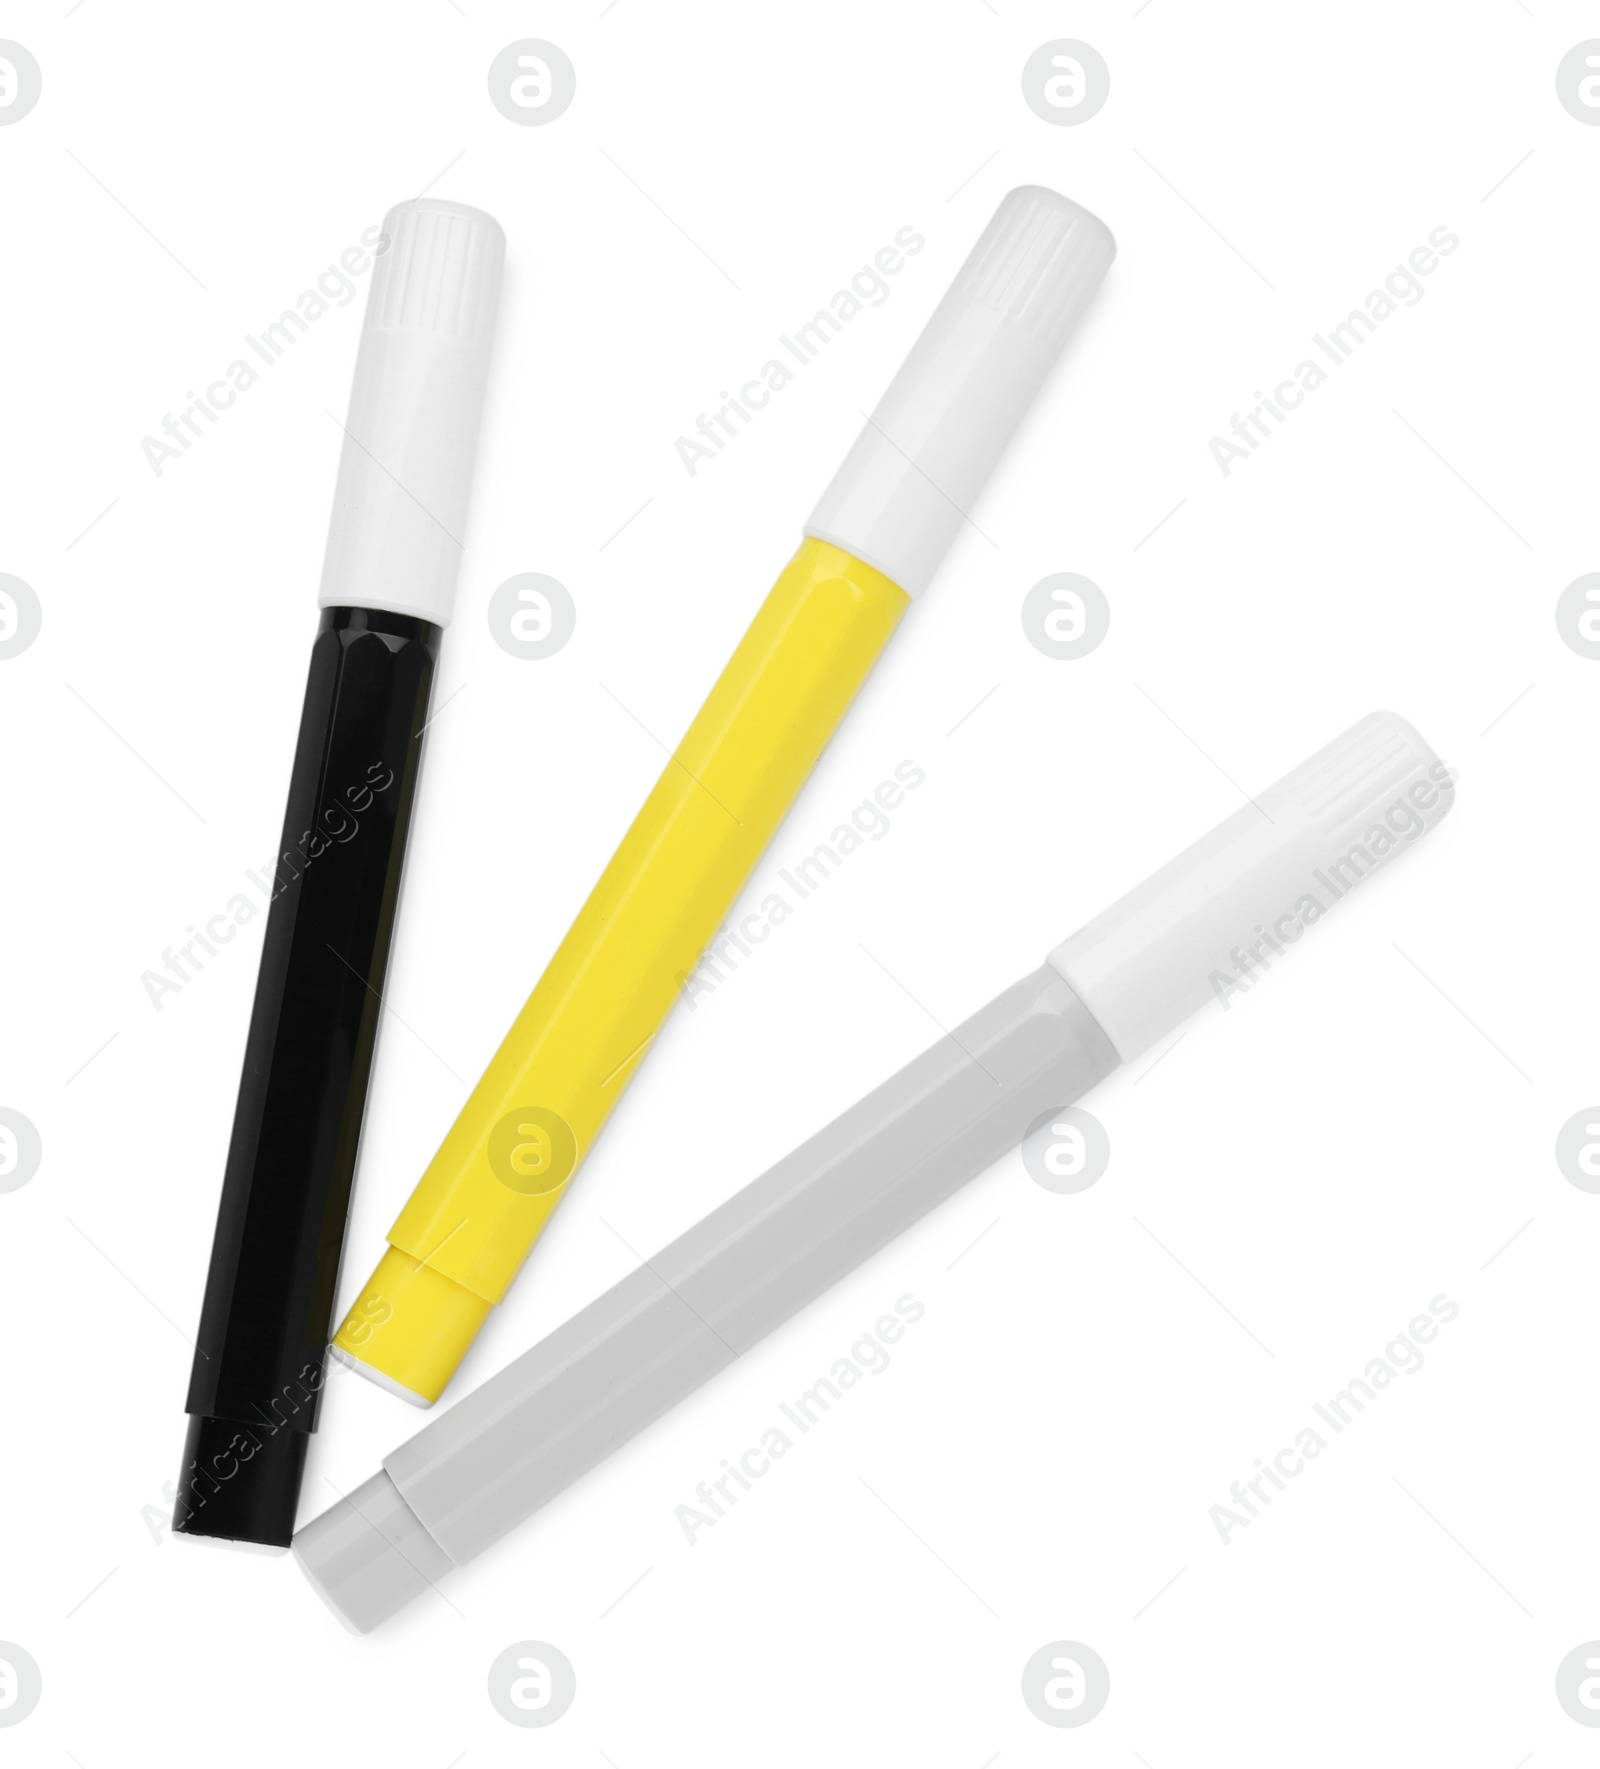 Photo of Different colorful markers on white background, top view